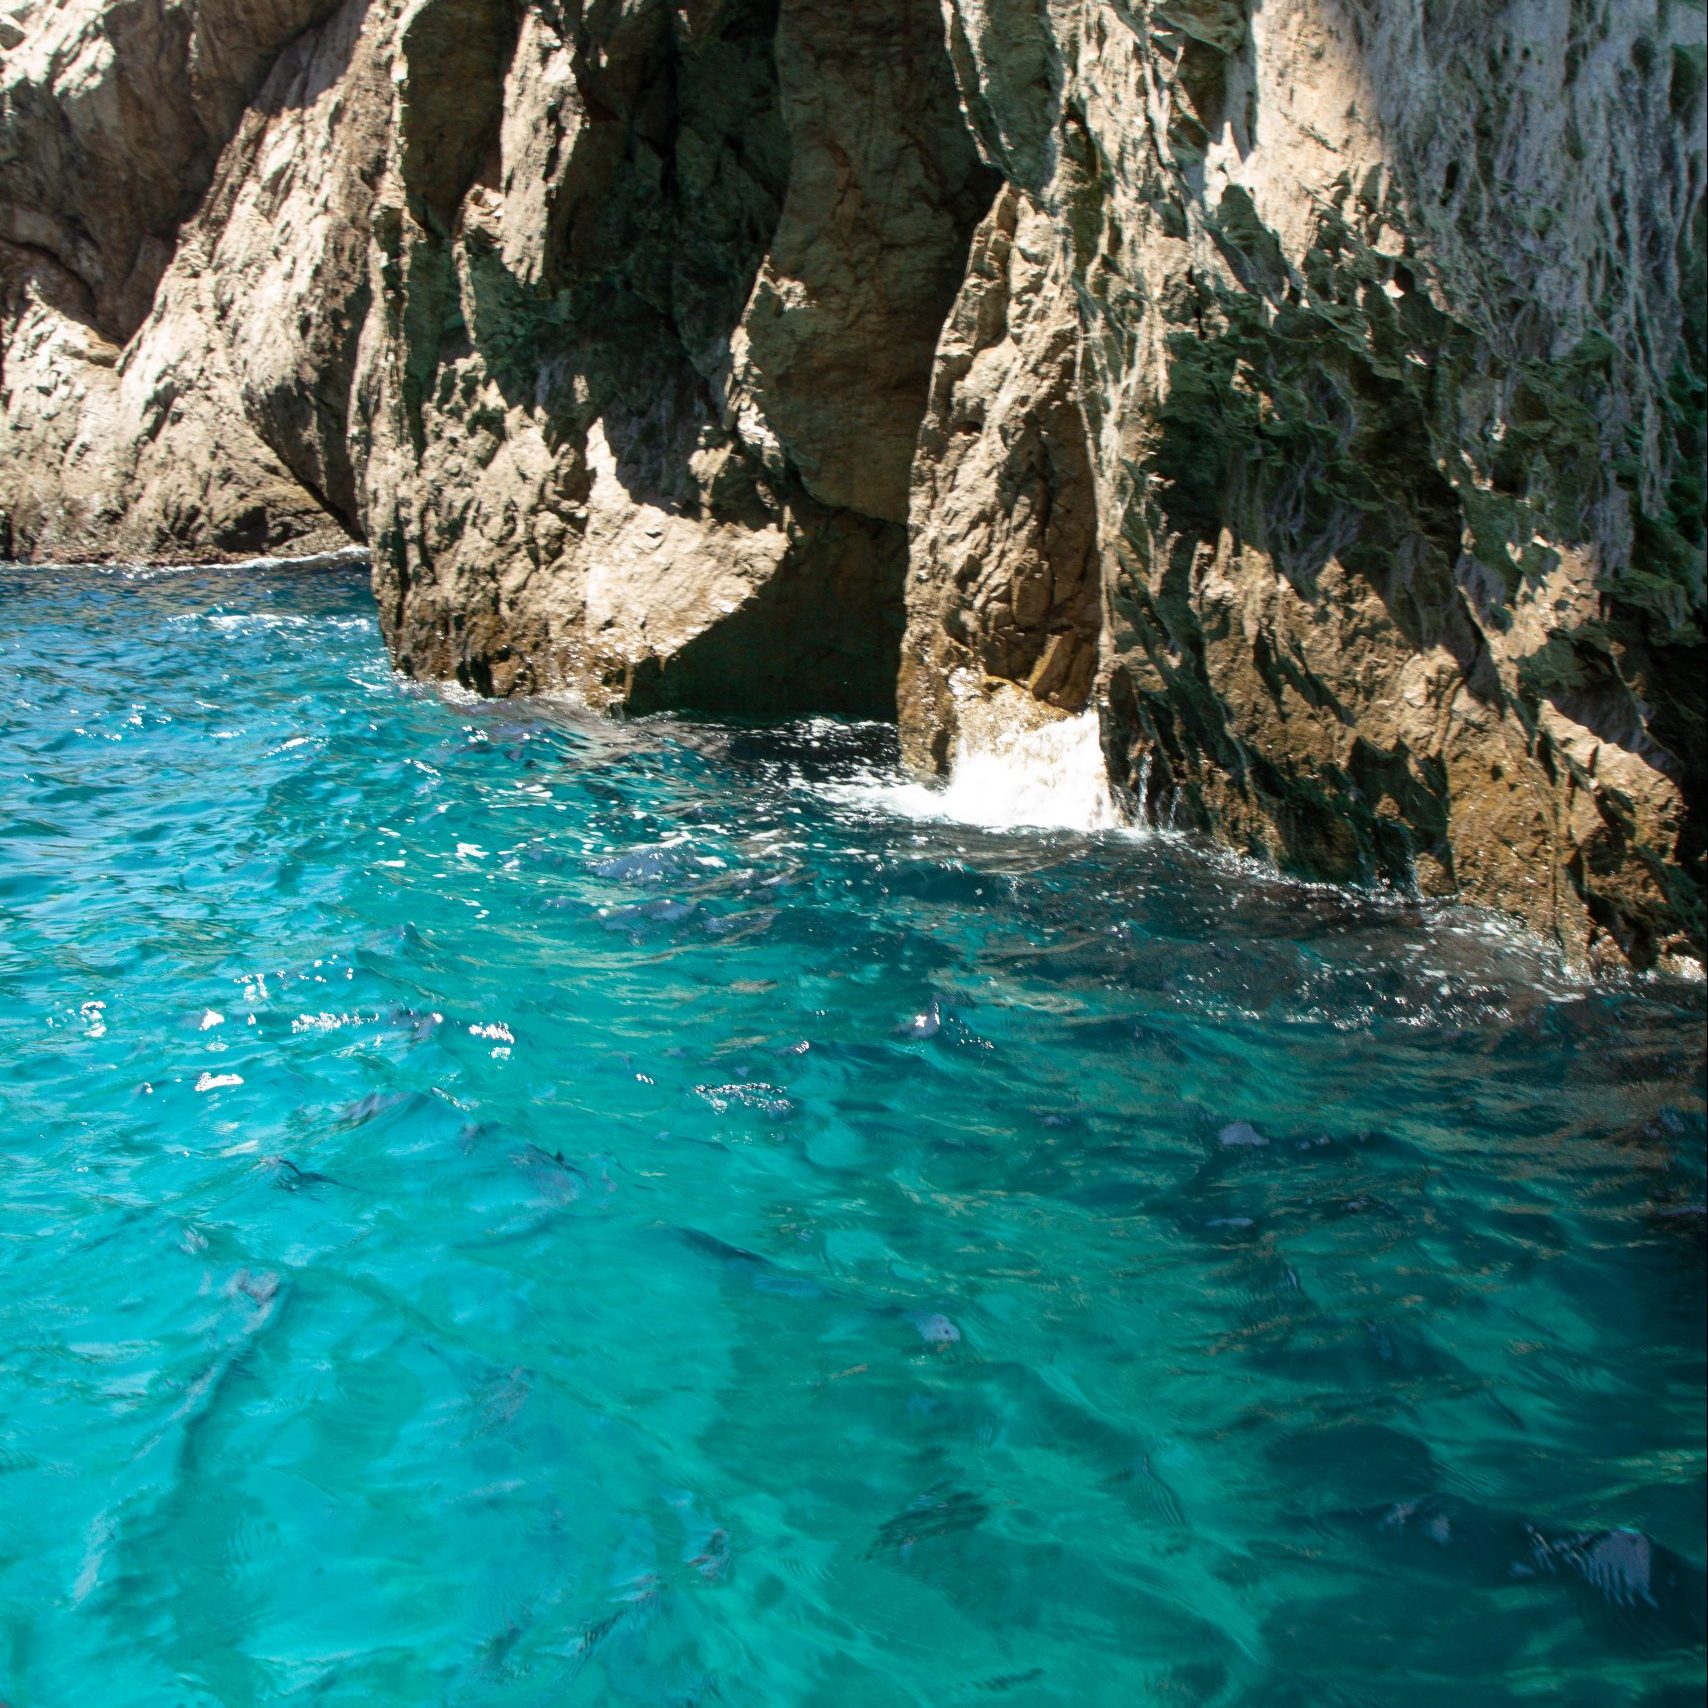 Capri is magical. Here's how to see it in a day!